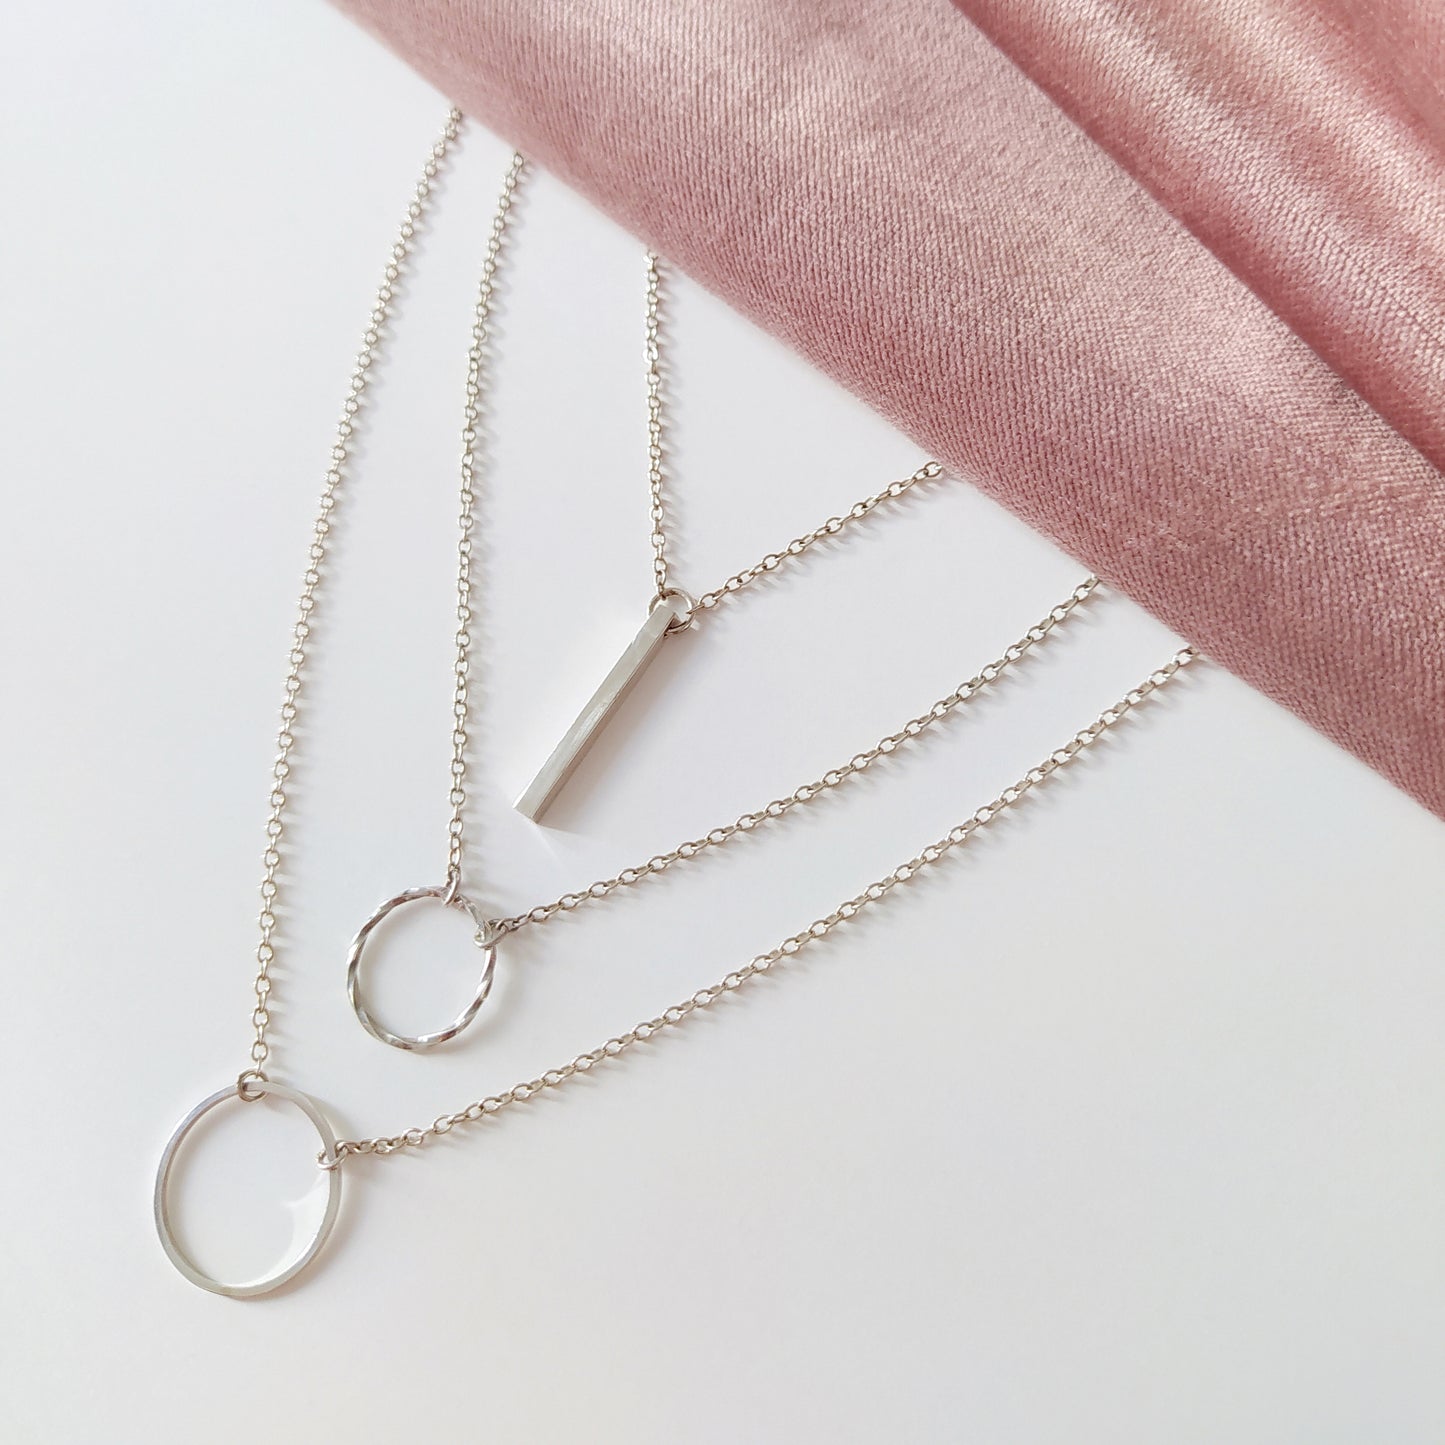 Adrian | dainty silver necklace with bar pendant